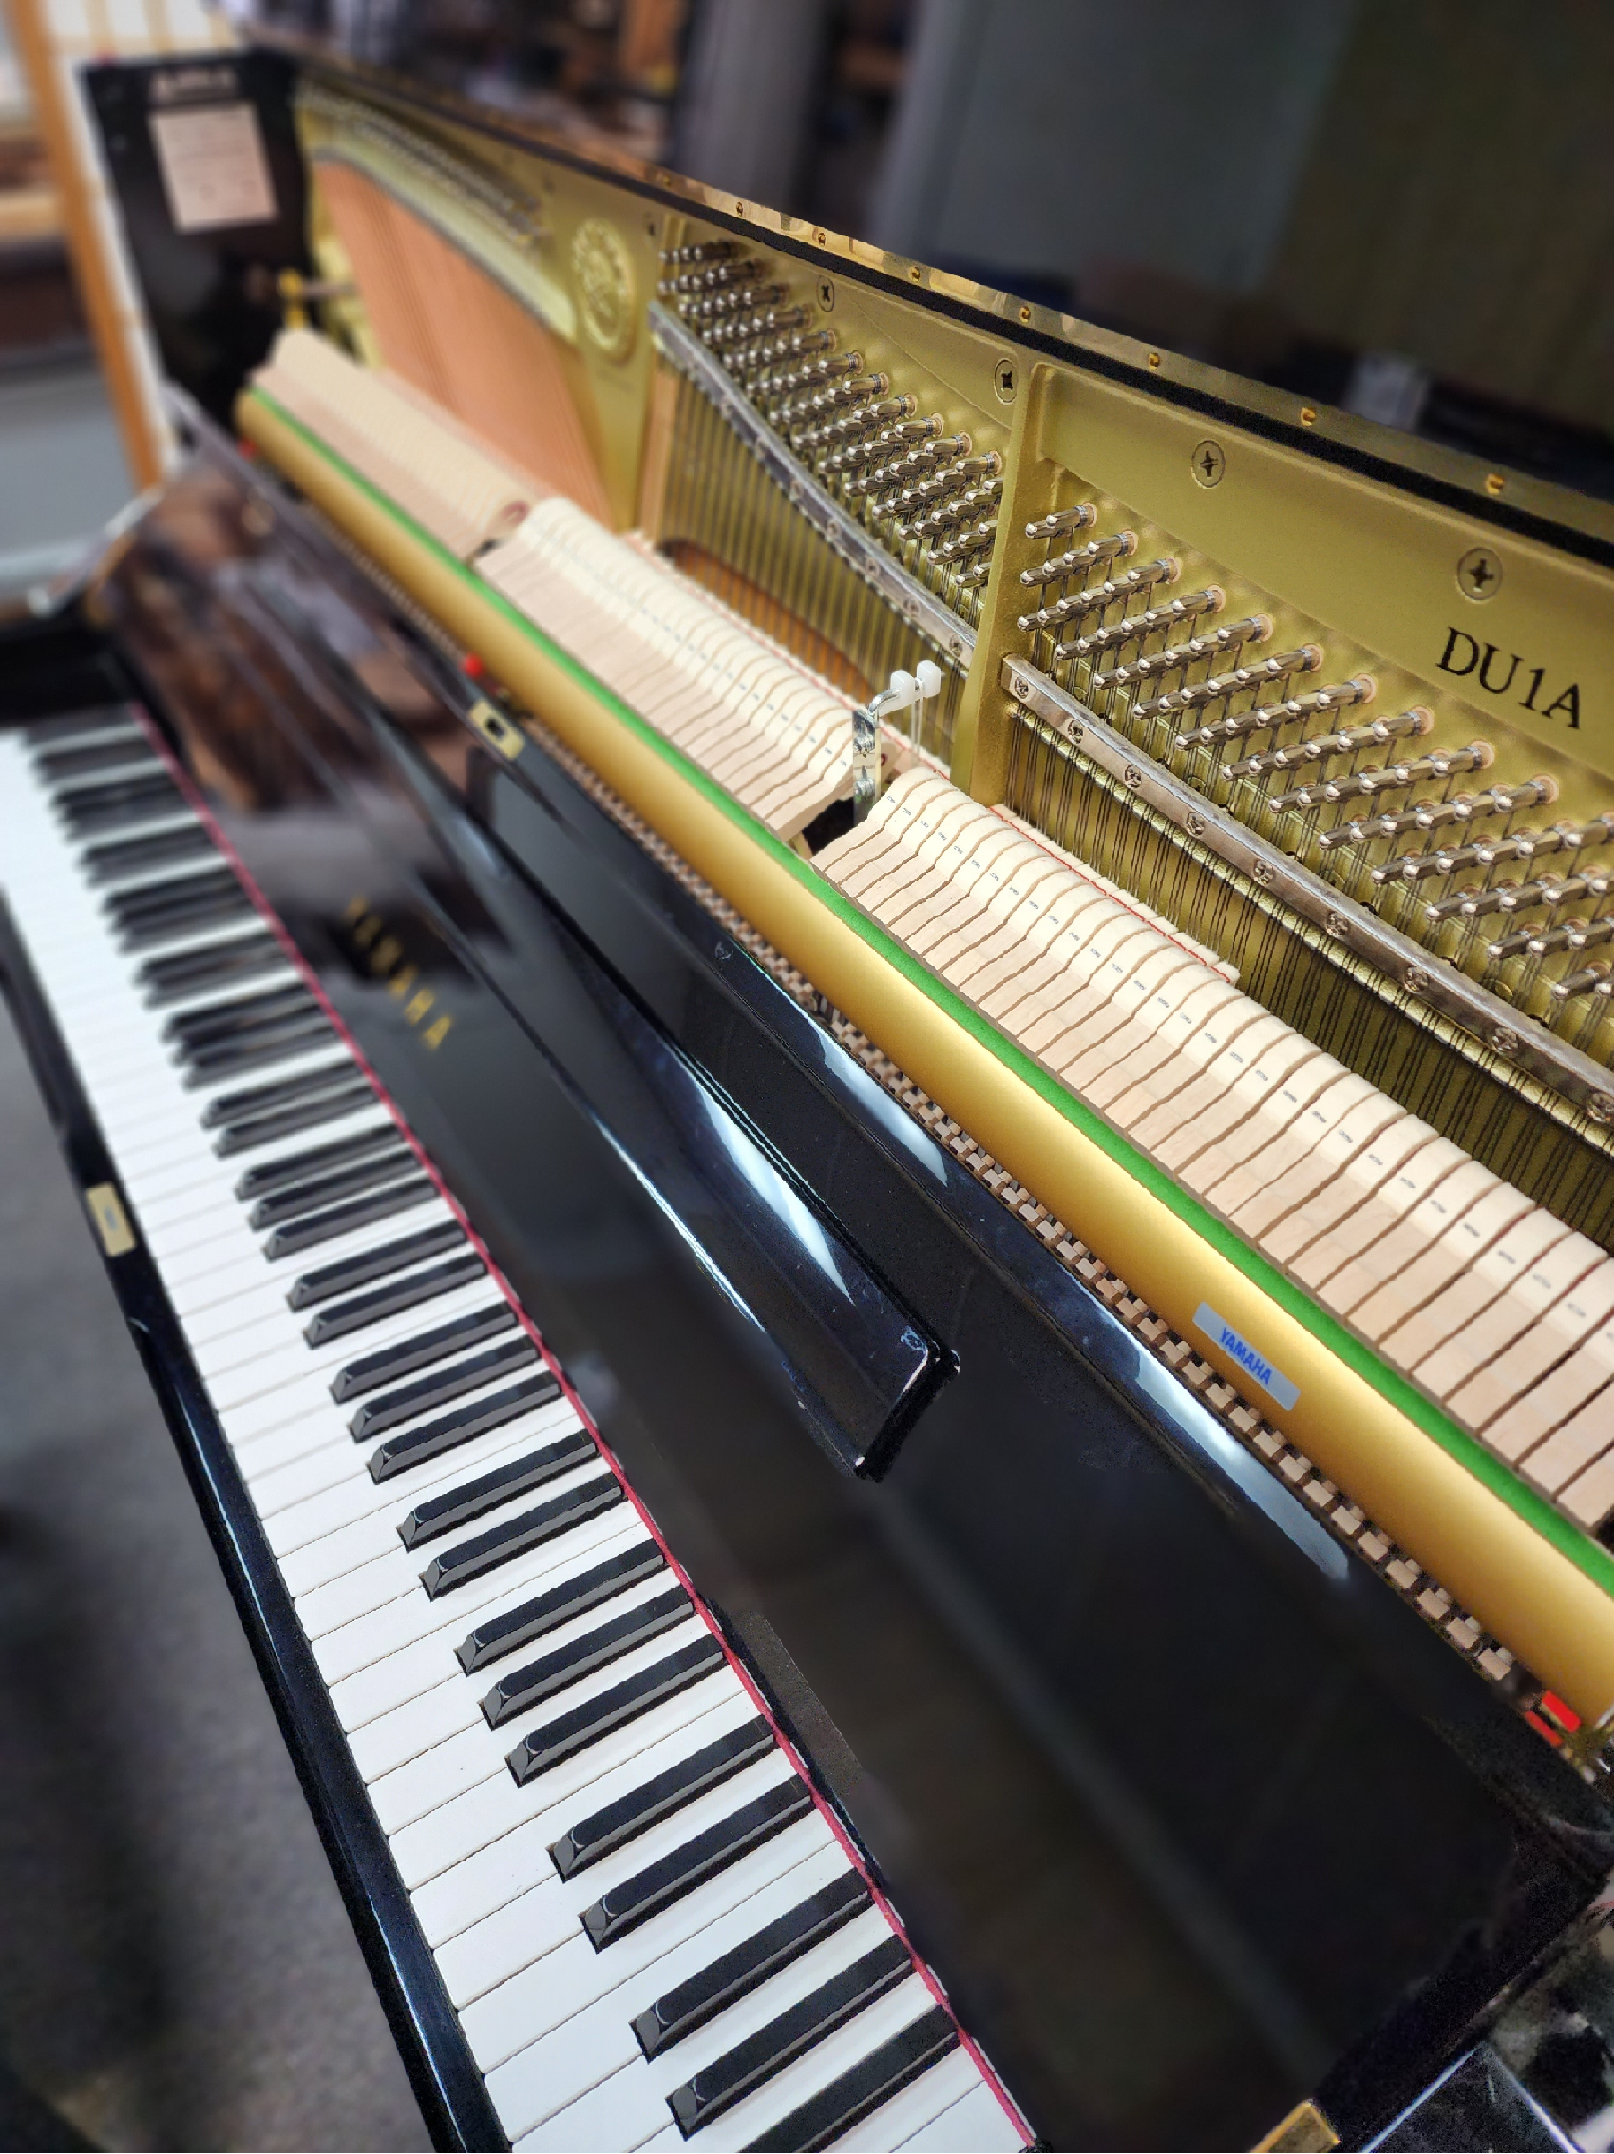 1c-Pre-Owned-2006-YAMAHA-DU1A-Disklavier-Upright-Piano-For-Sale